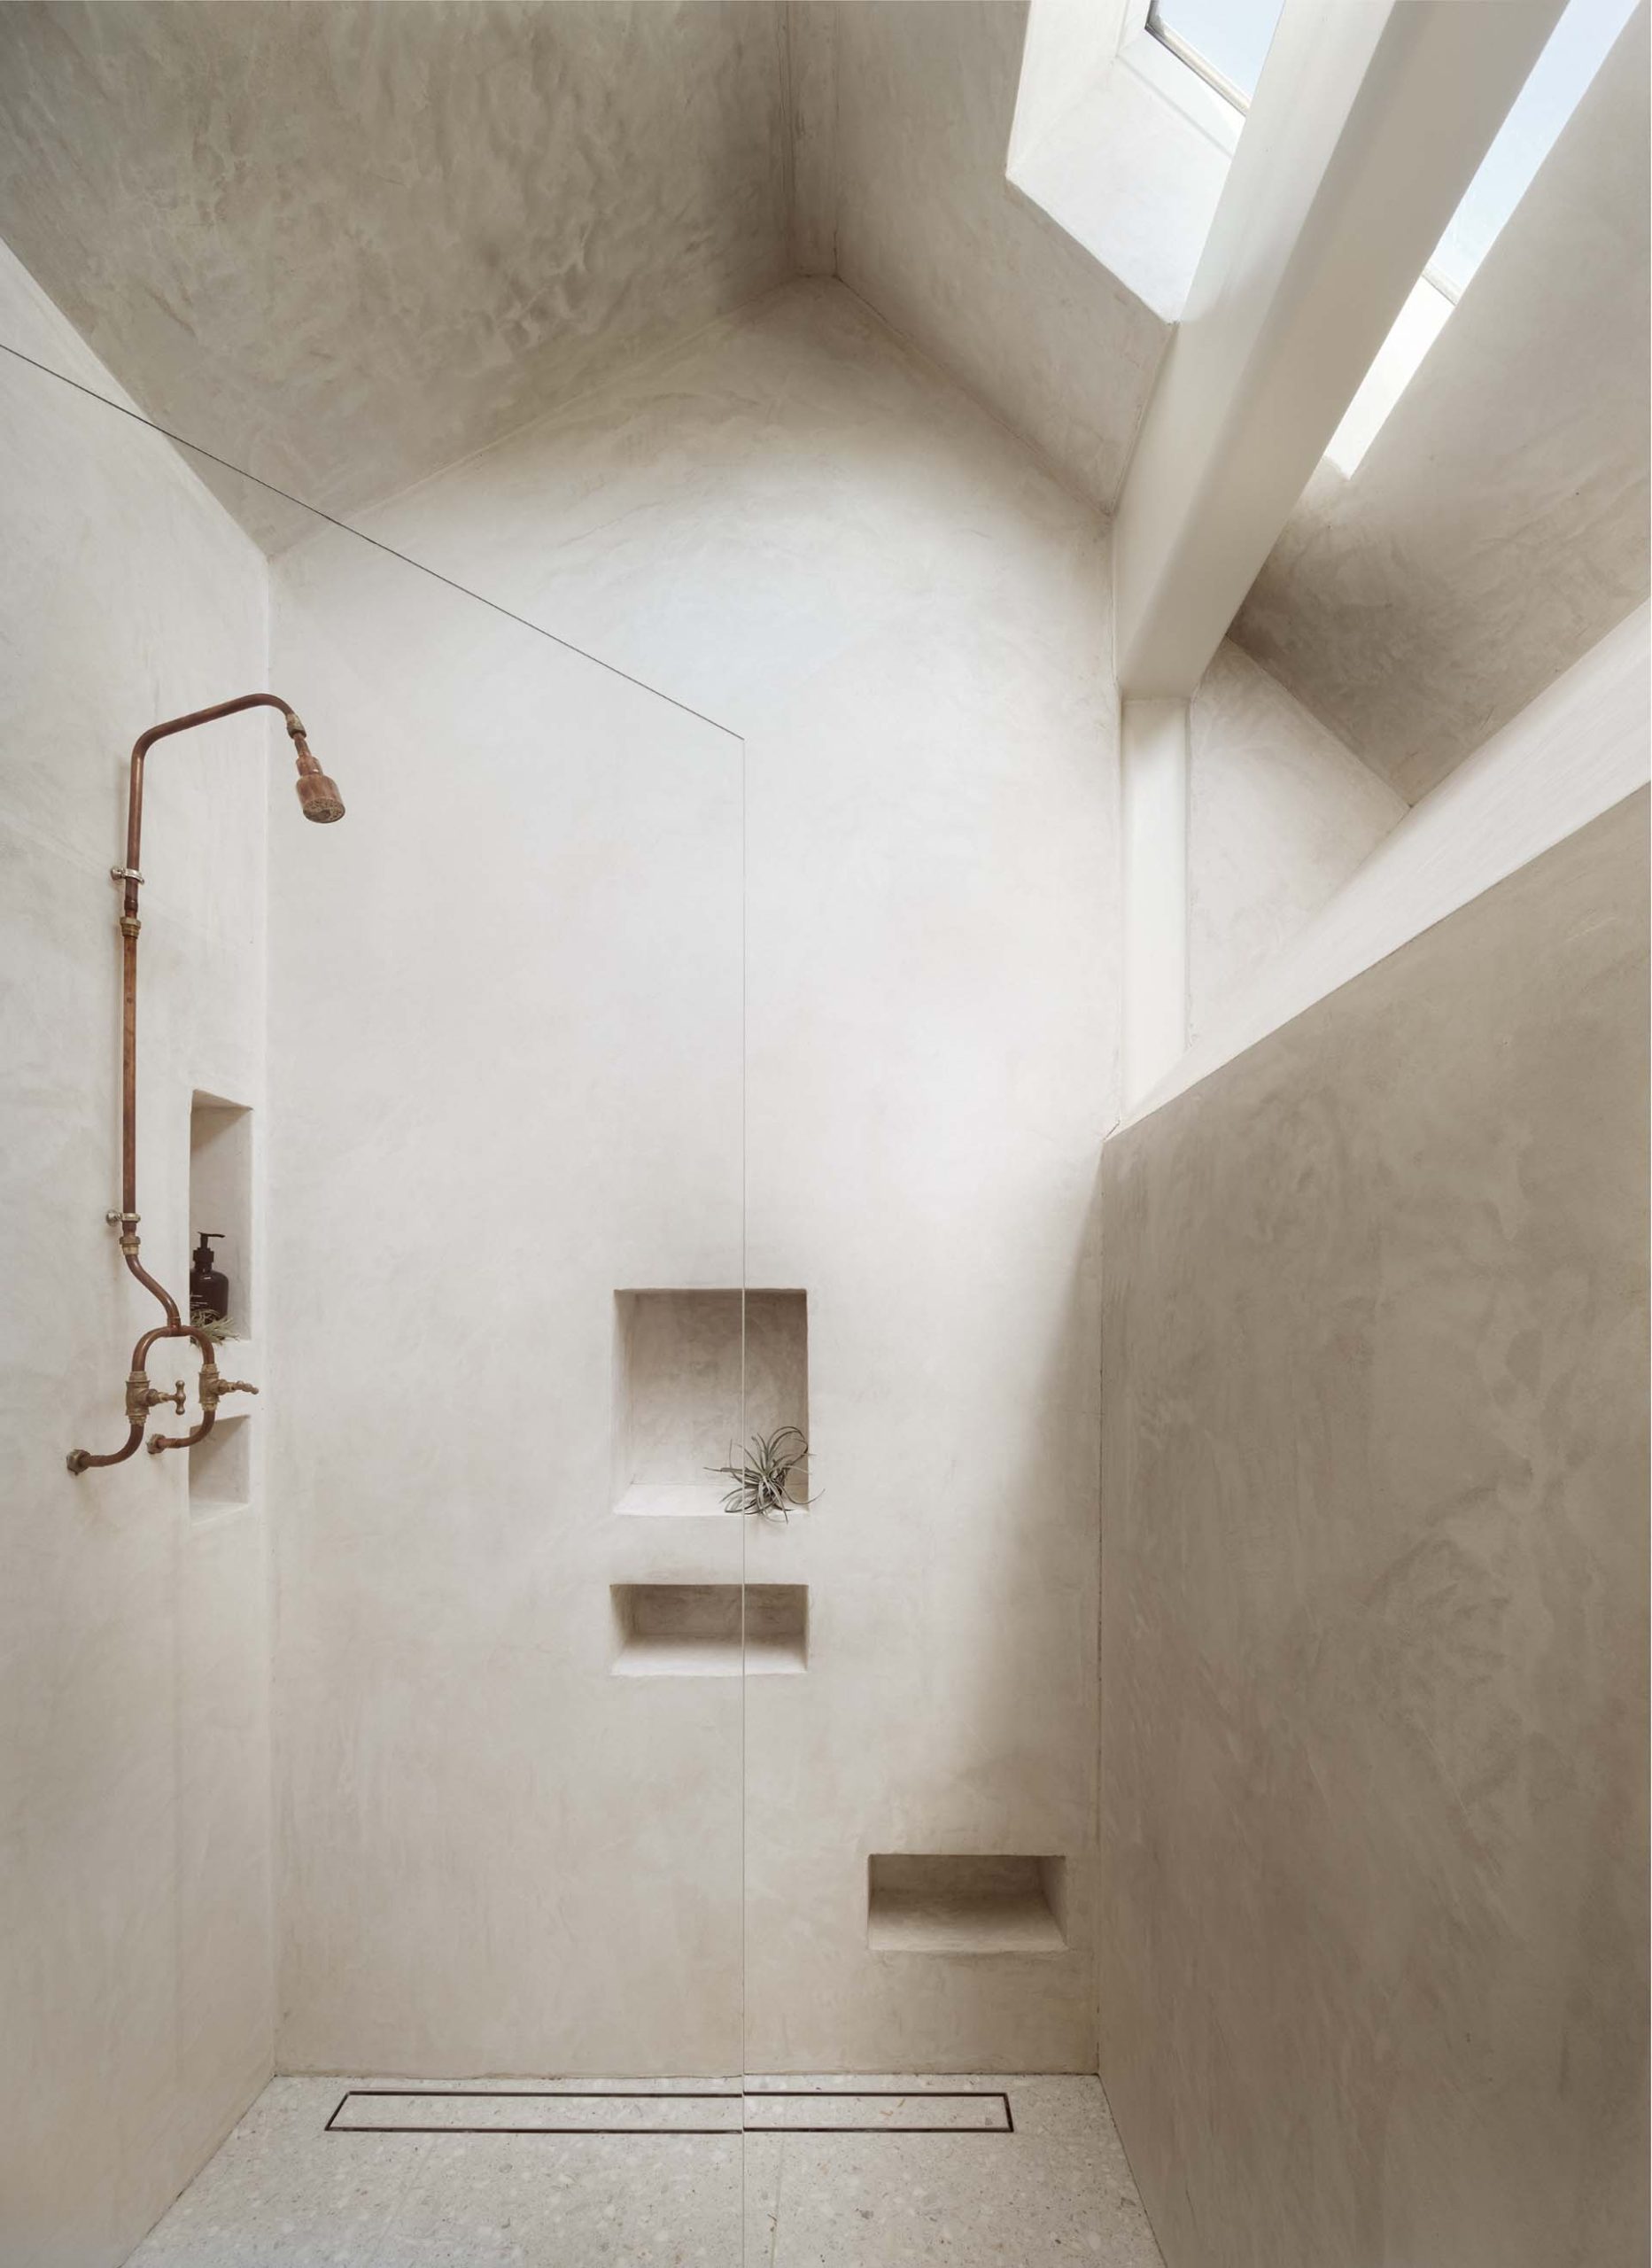 A bathroom includes an angular mirror, a s،wer with shelving niches, and a skylight.